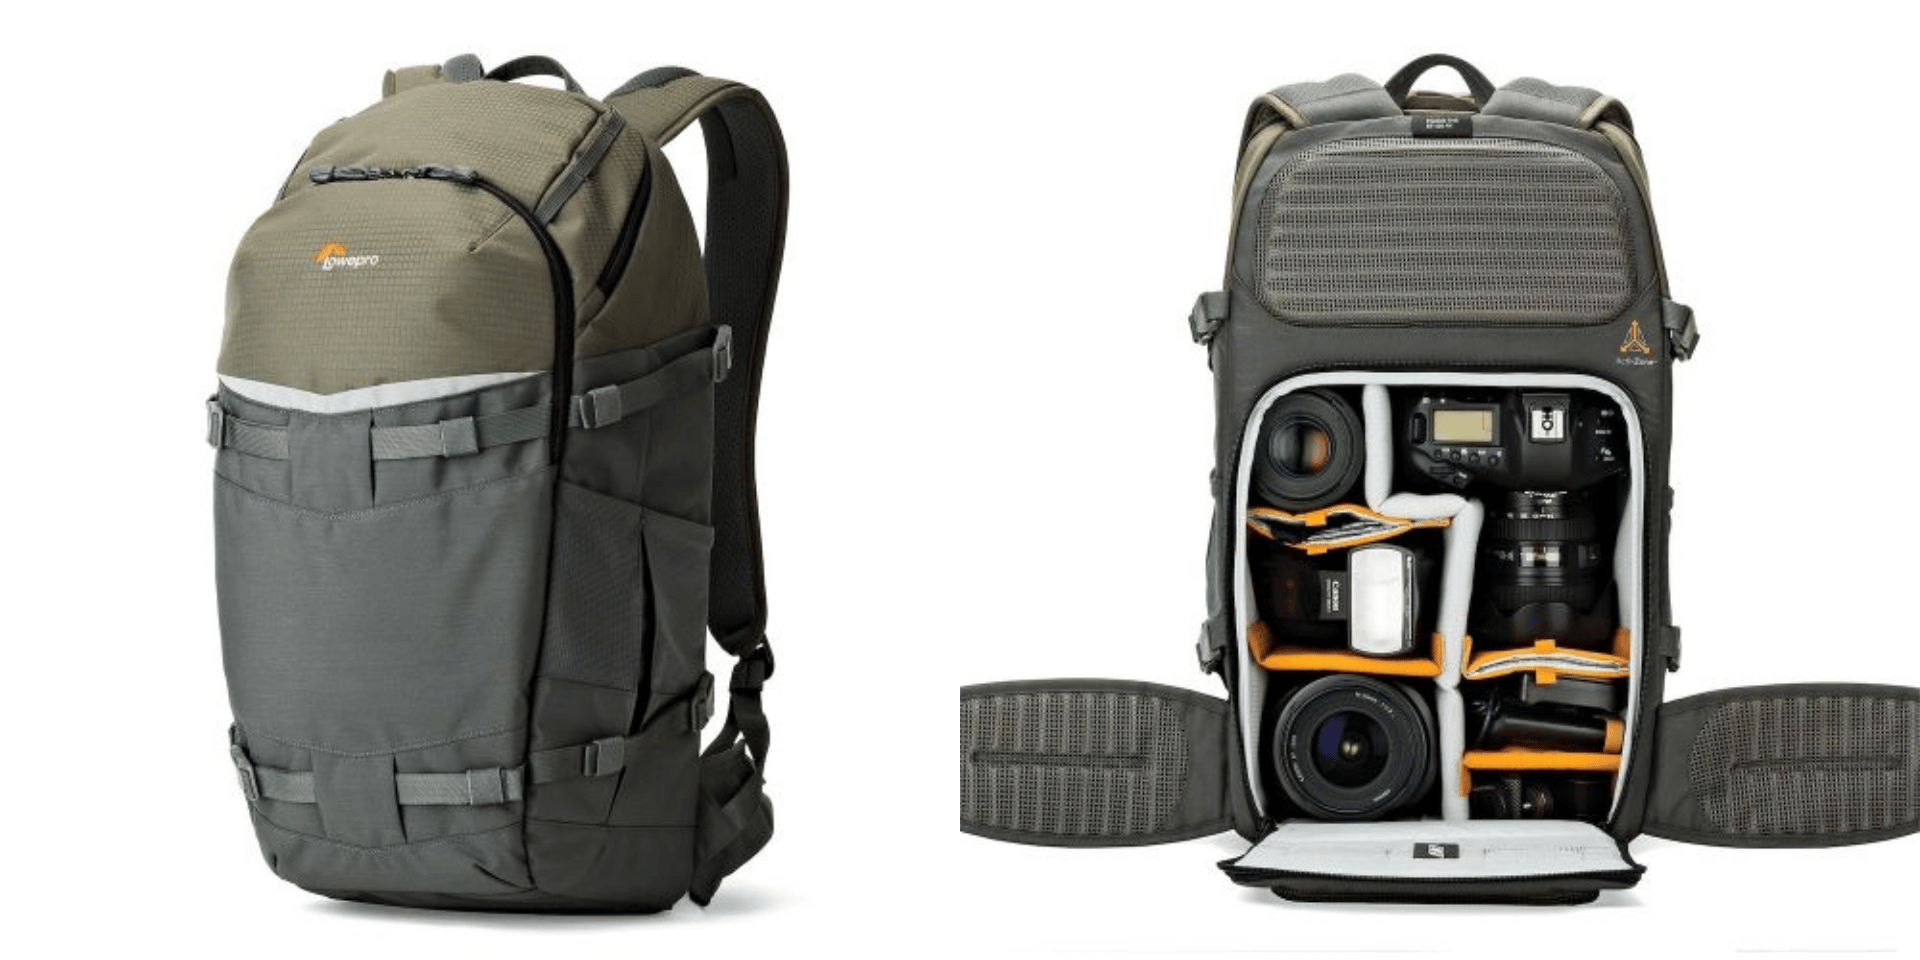 Choosing Gear for Sports Photography III: How Should You Choose Your Accessories?